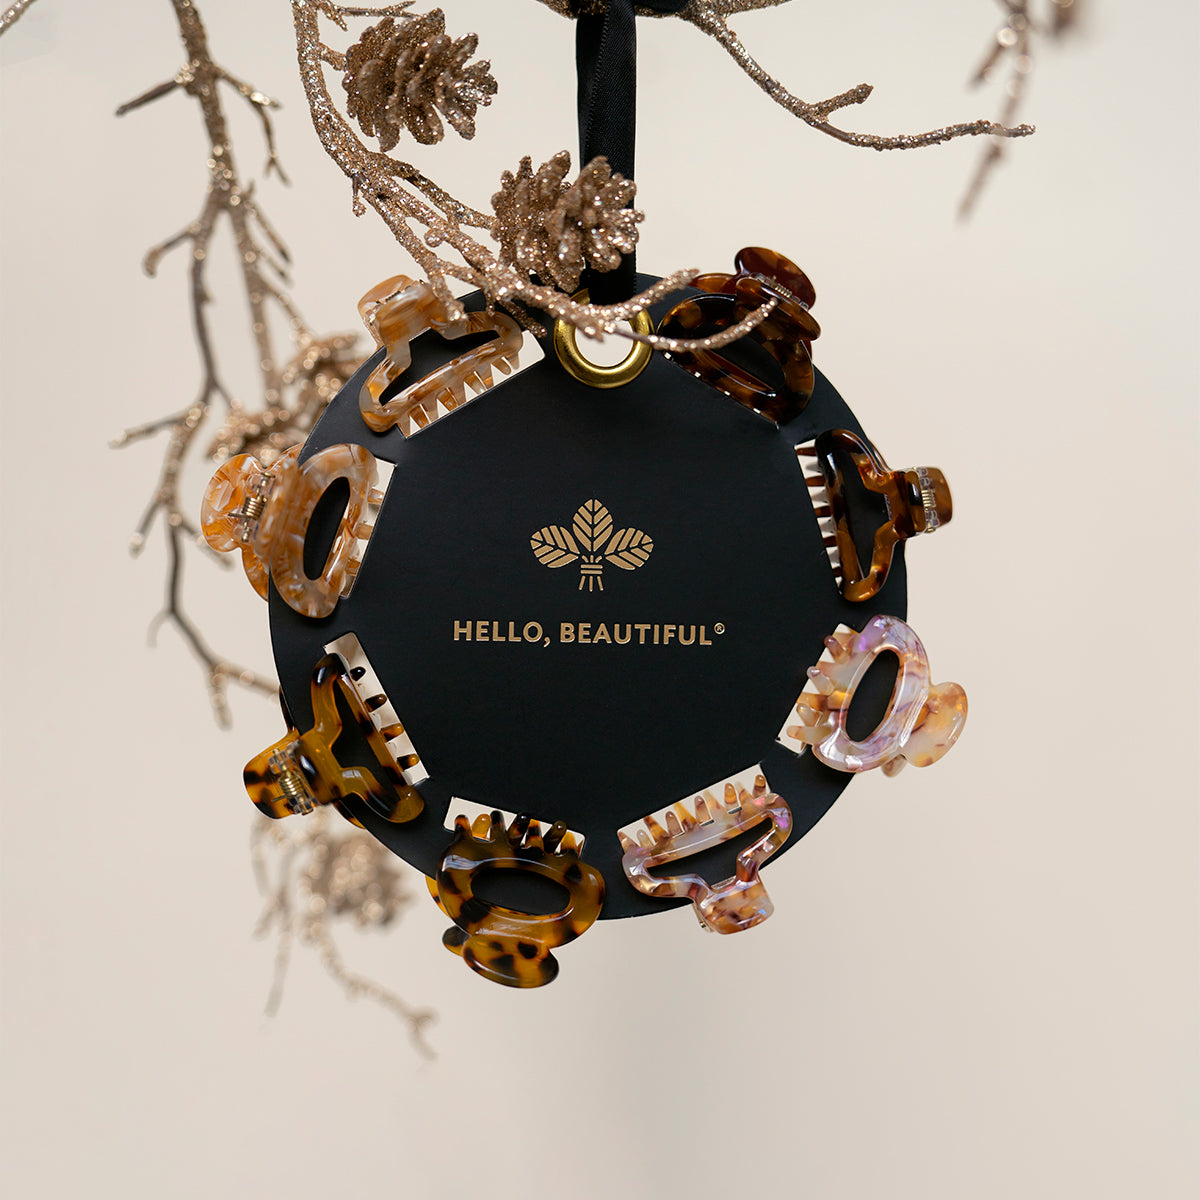 Hair accessories are perfect stocking stuffers for women - on sale now 30% off!